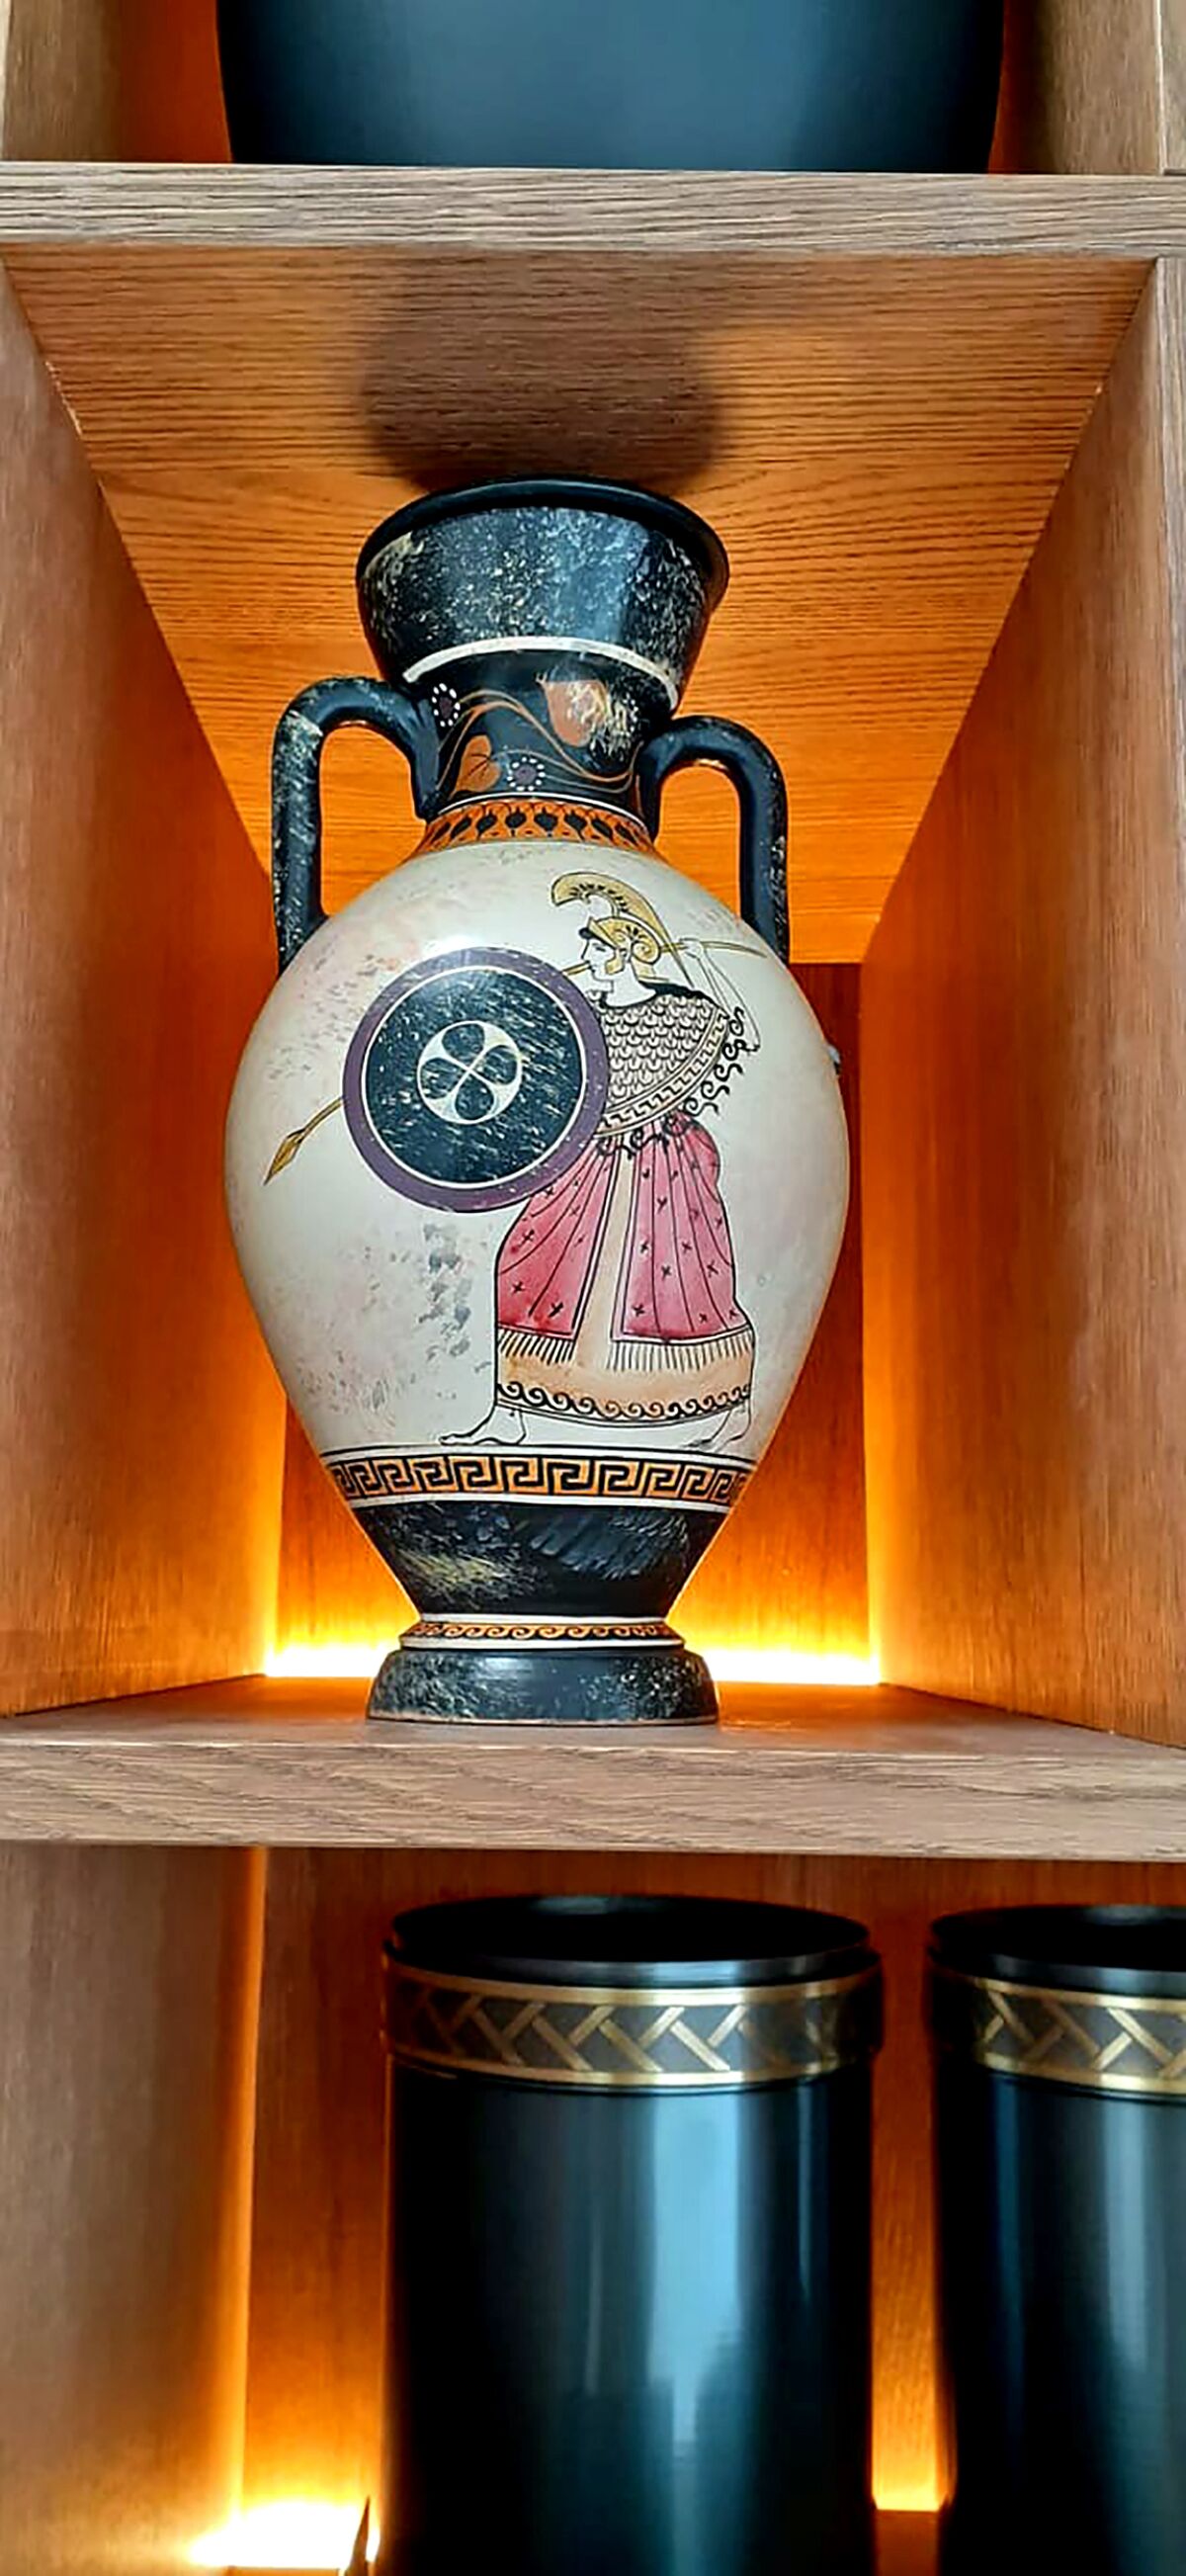 Ritsona Crematorium offers funerary urns, some modeled on ancient Greek designs. 